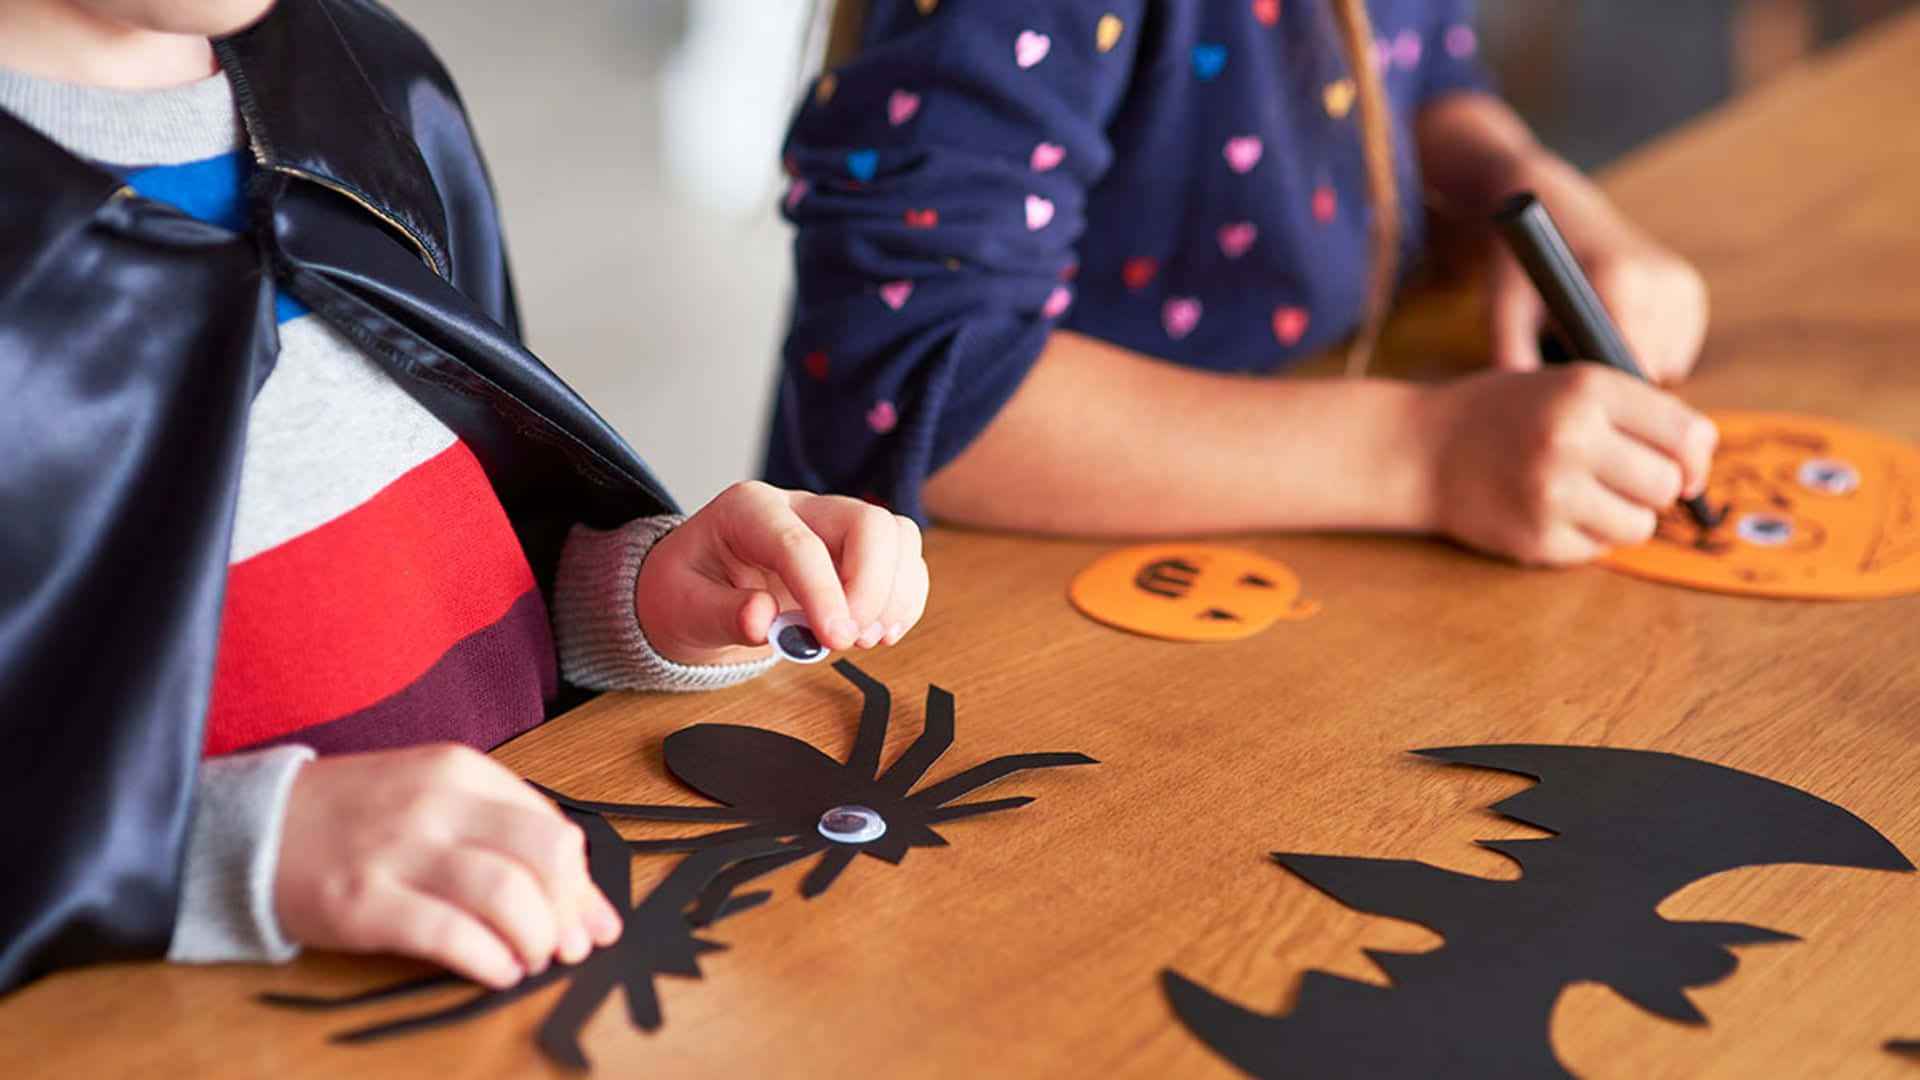 Spice up Halloween with these spook-tacular Halloween Crafts! Wallpaper